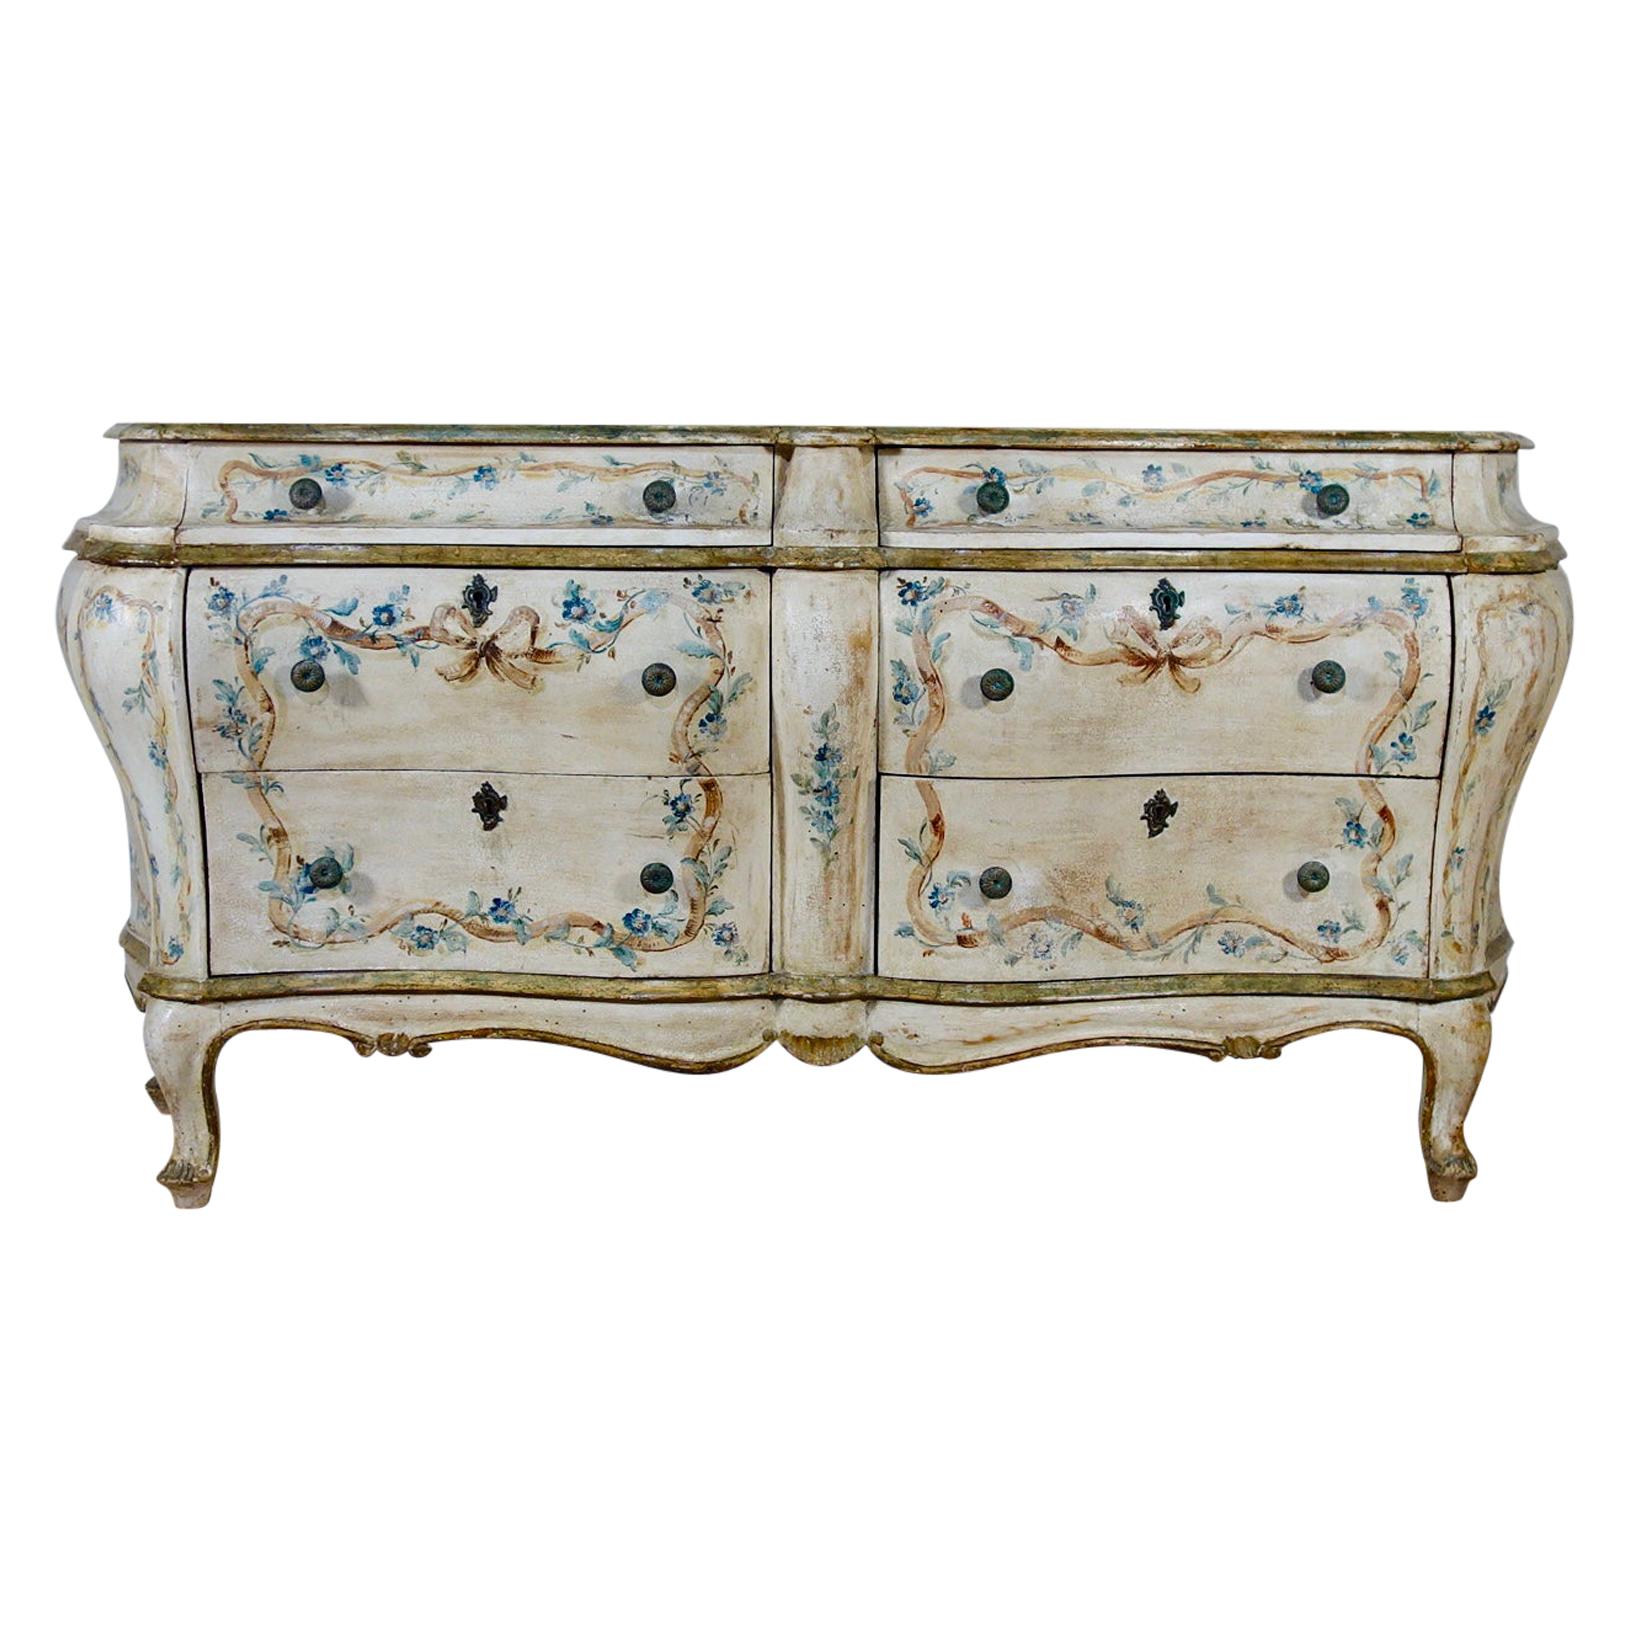 19th Century Italian Venetian Cream Floral Painted Bombe Sideboard - Commode